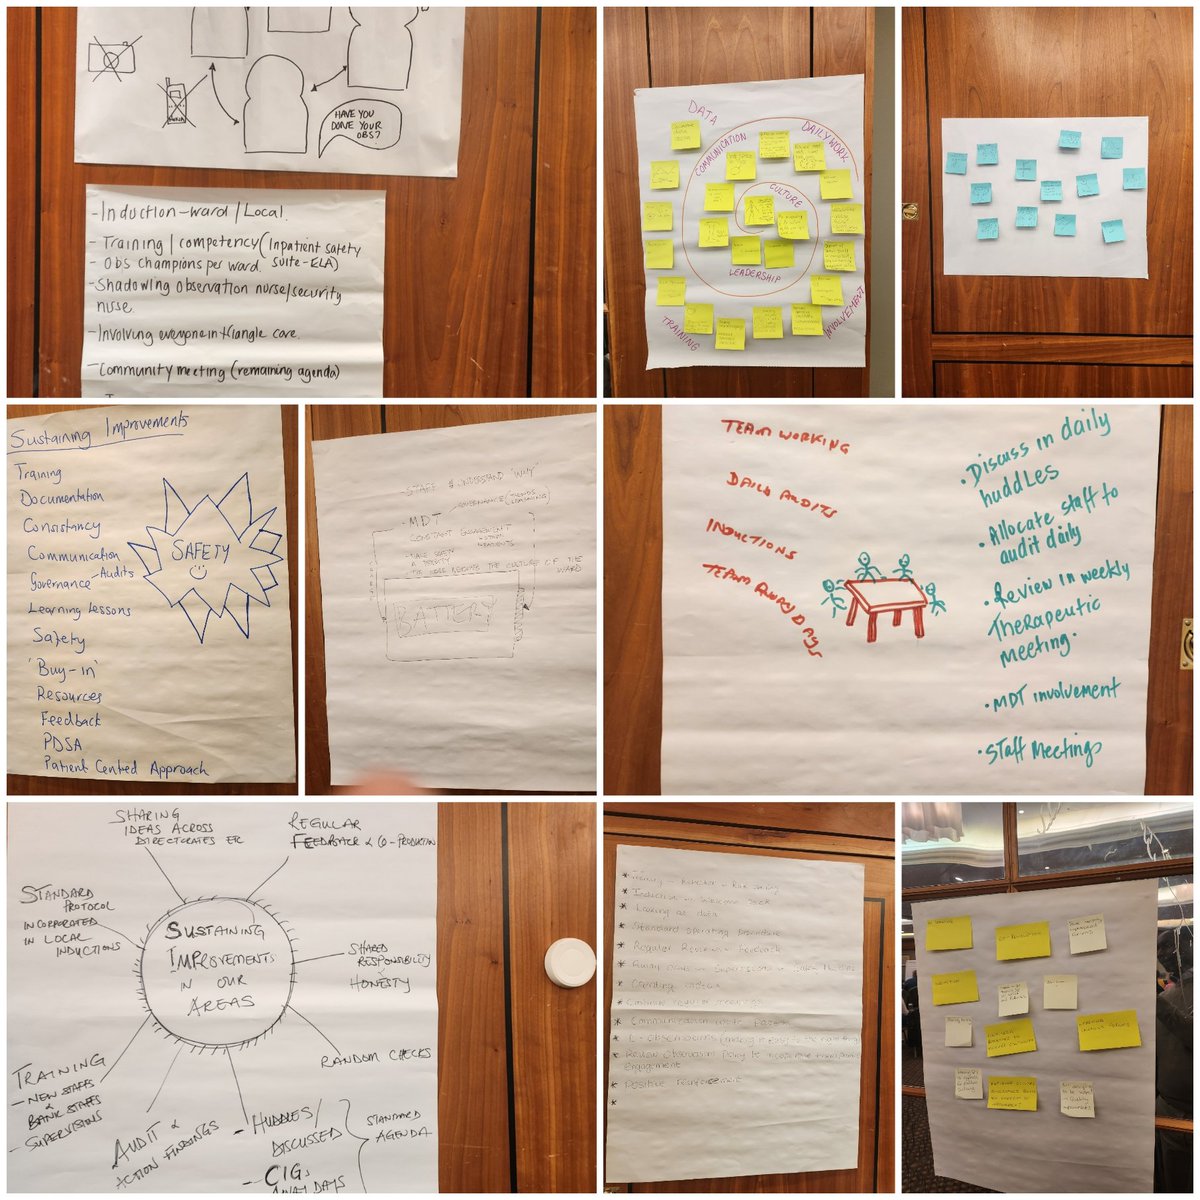 Meaningful reflections from the 52 @NHS_ELFT inpatient mental health wards about what it takes to sustain improvement after 1.5 years of #QualityImprovement work to improve therapeutic engagement & observations. @SashaJs1980 @LorraineSunduza @EdwinCCN @ELFT_QI @DrAmarShah